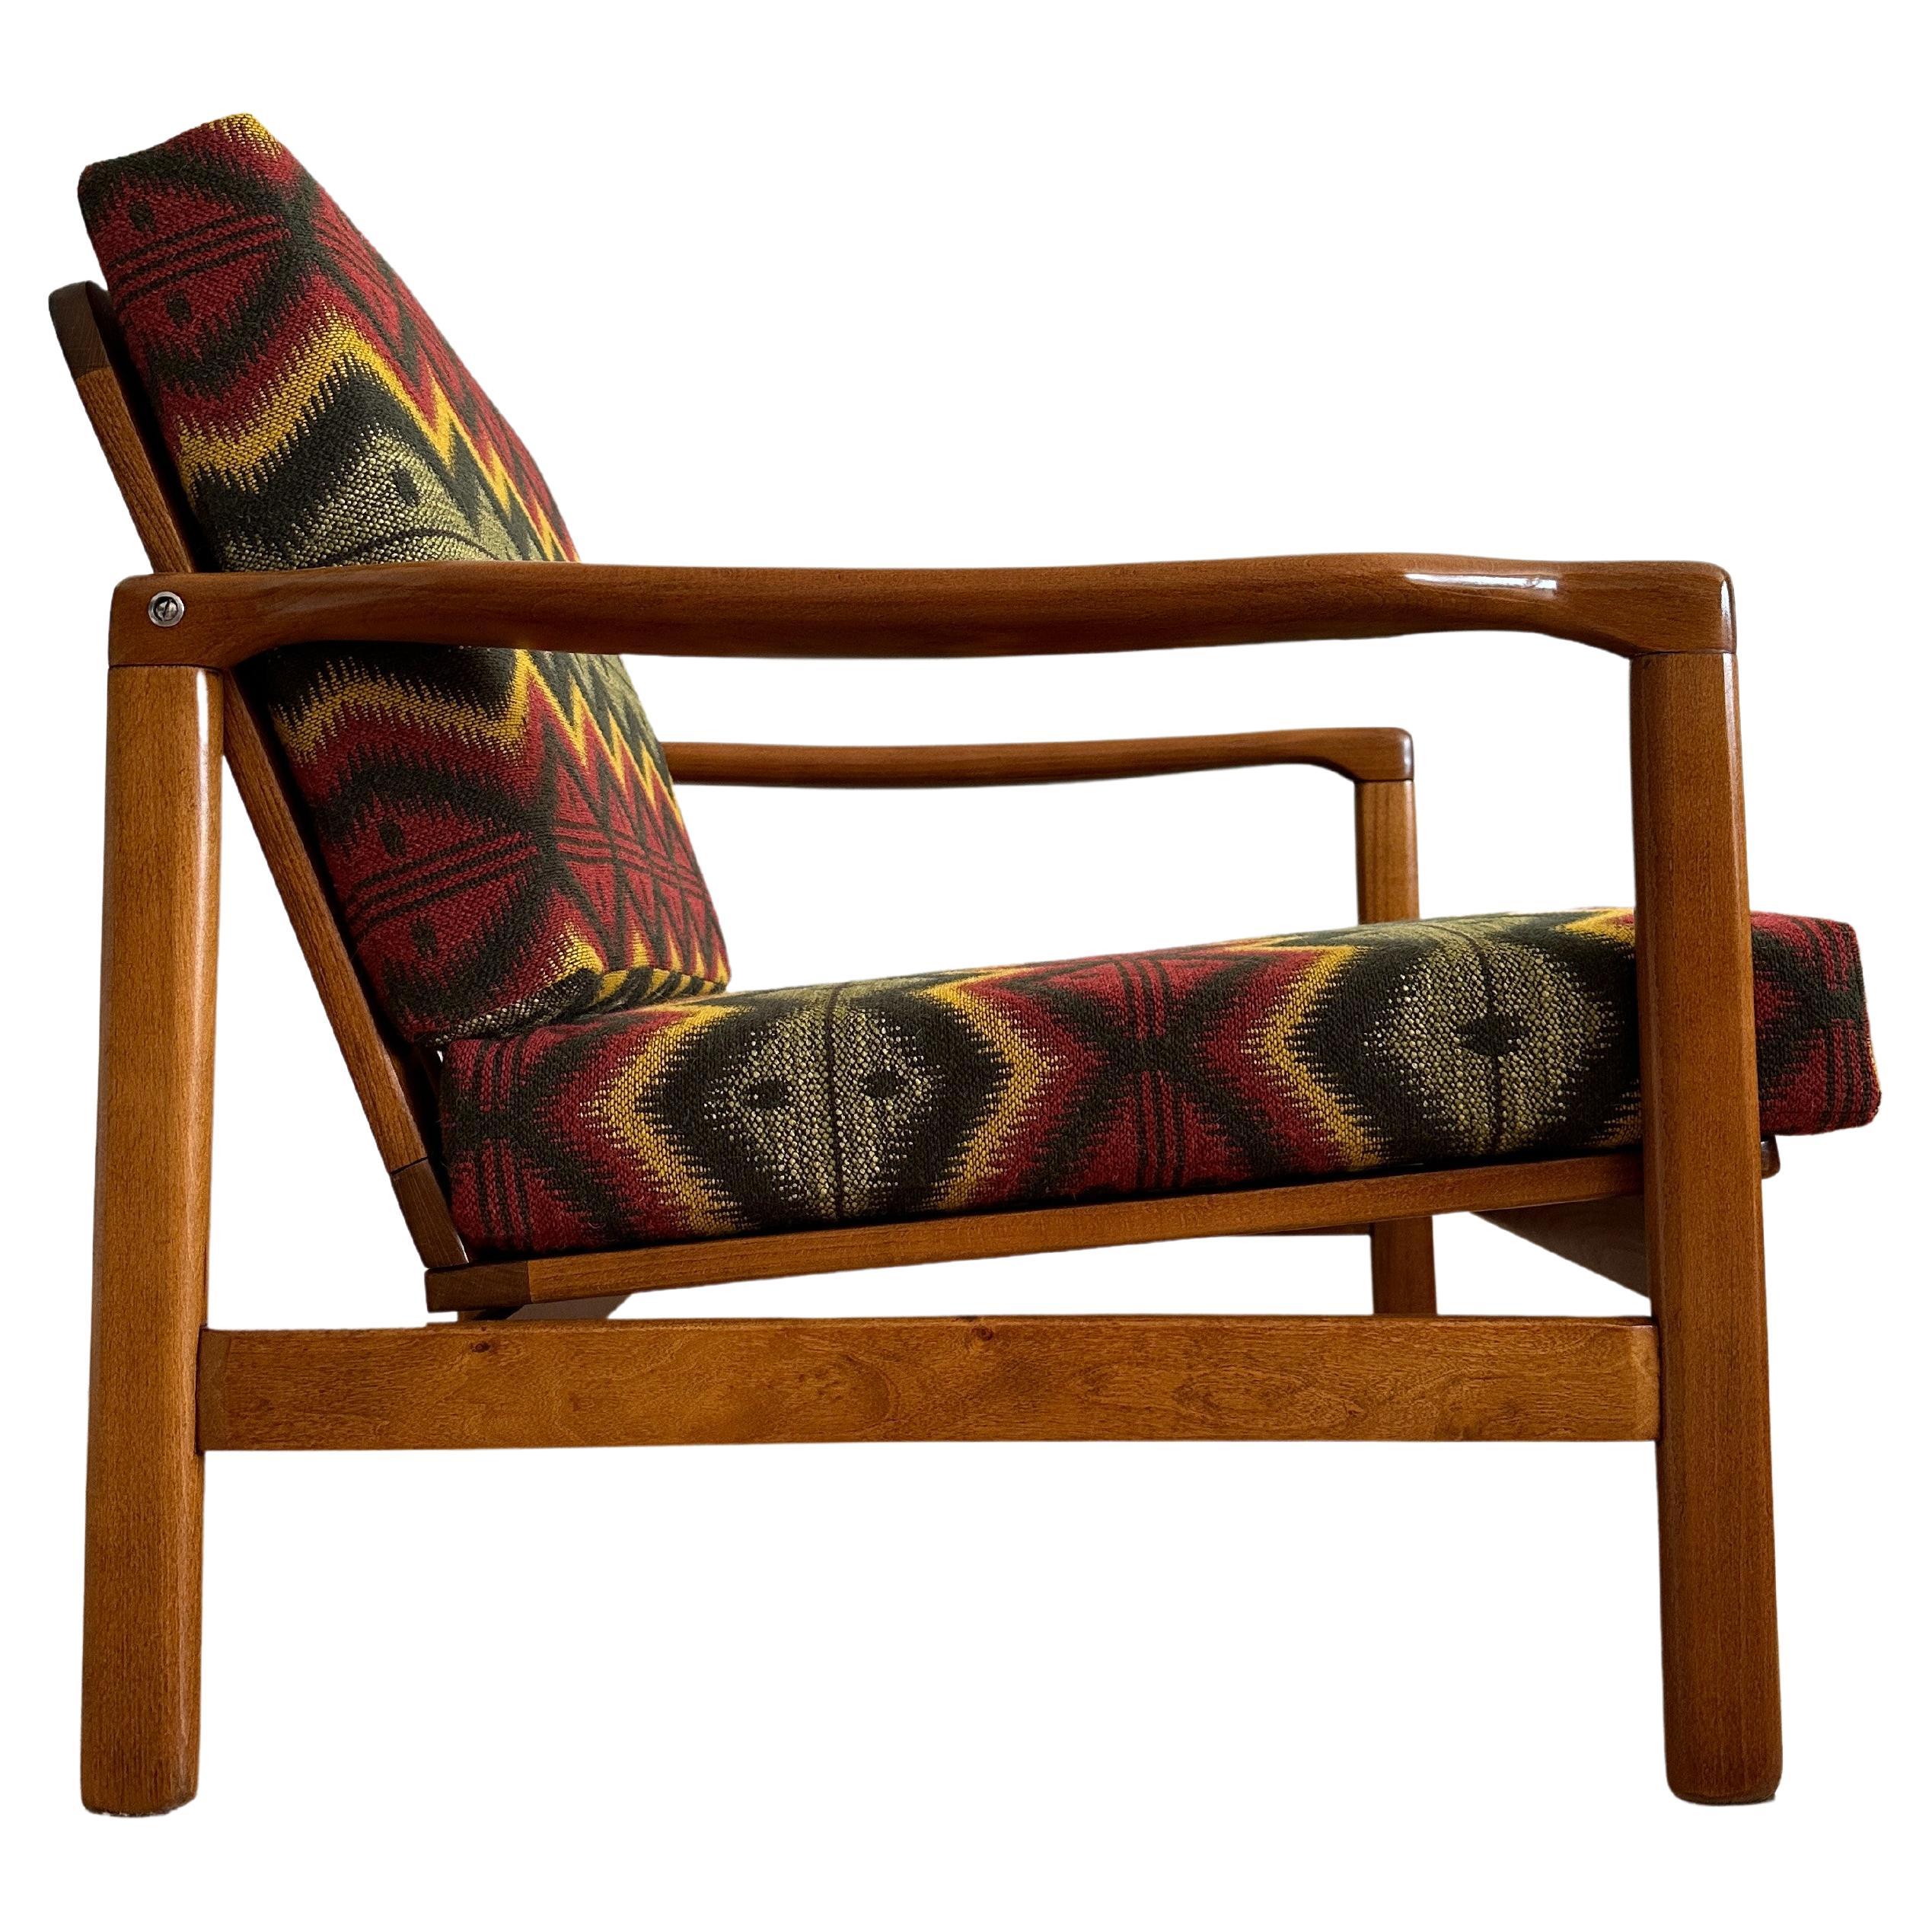 Midcentury Armchair by Zenon Bączyk, Mind the Gap Upholstery, Europe, 1960s For Sale